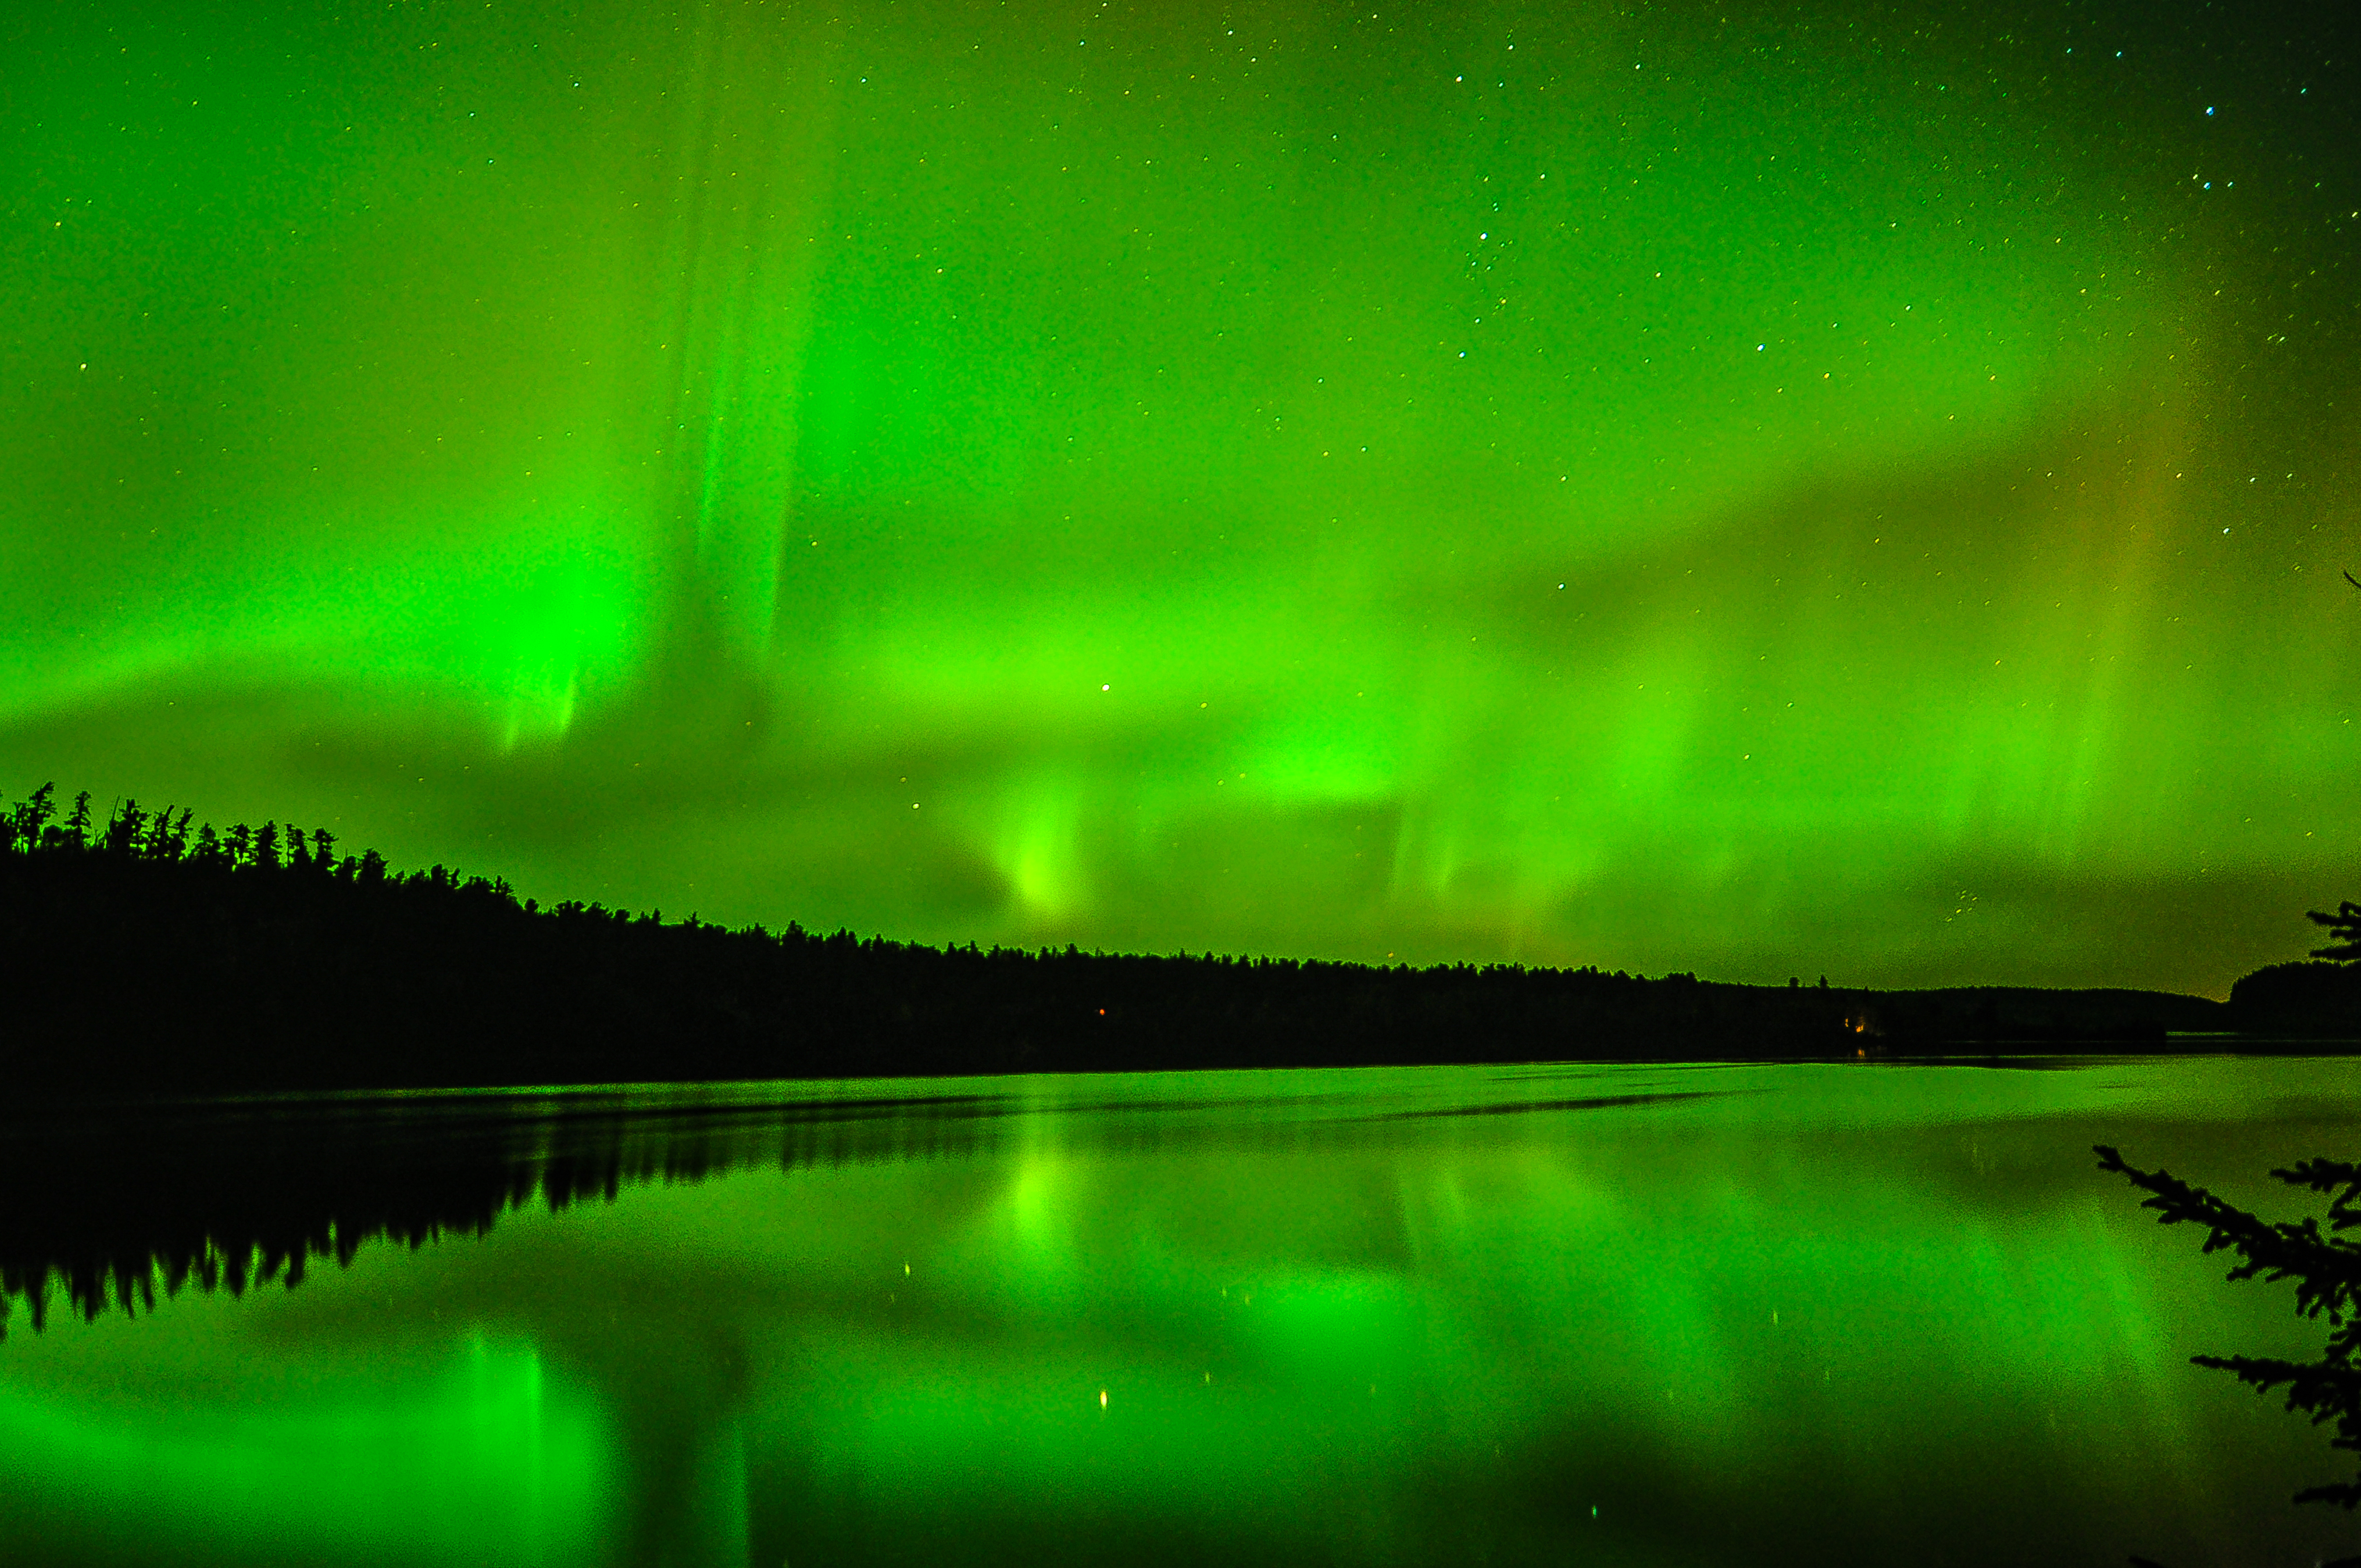 Northern Lights: When and where to see them?